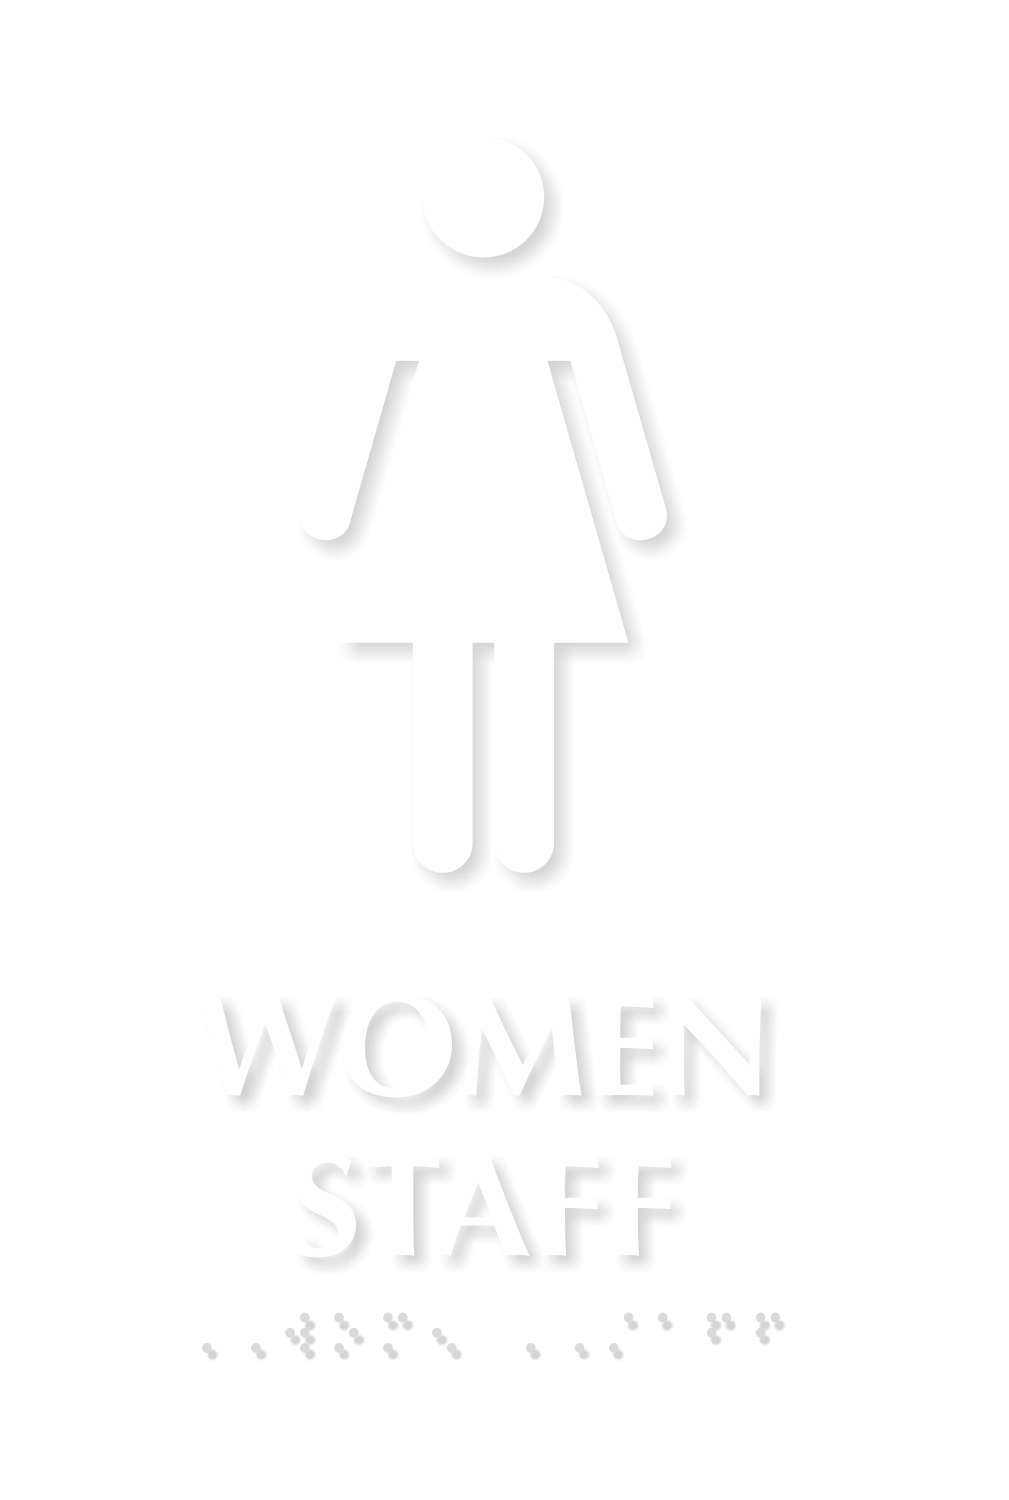 Women Staff TactileTouch Braille Restroom Sign